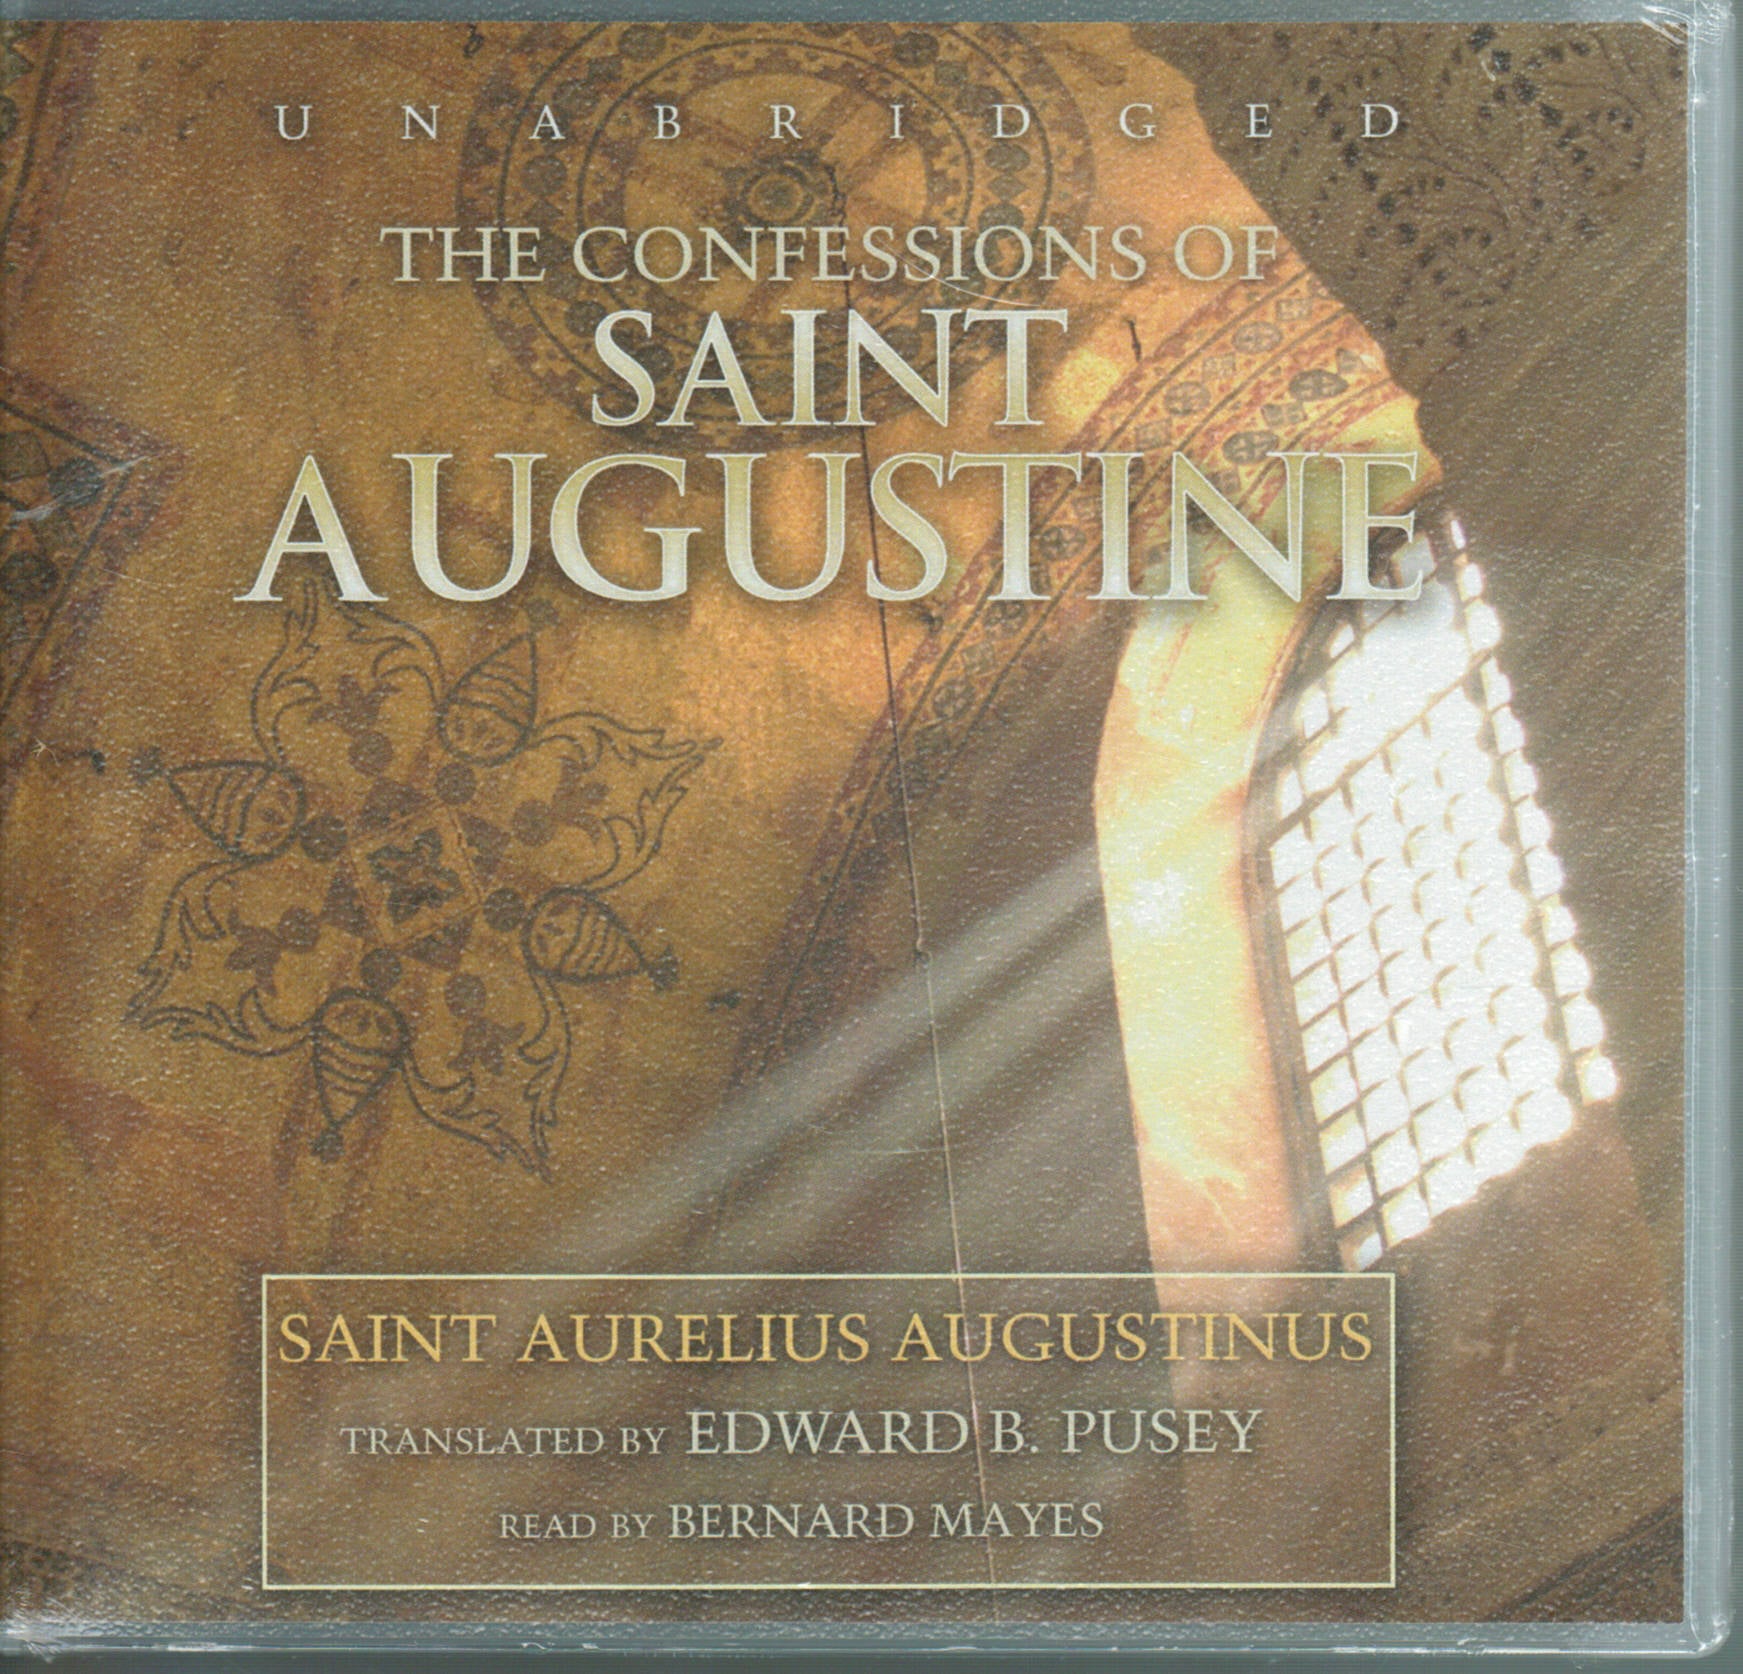 The Confessions of Saint Augustine - Audio Book